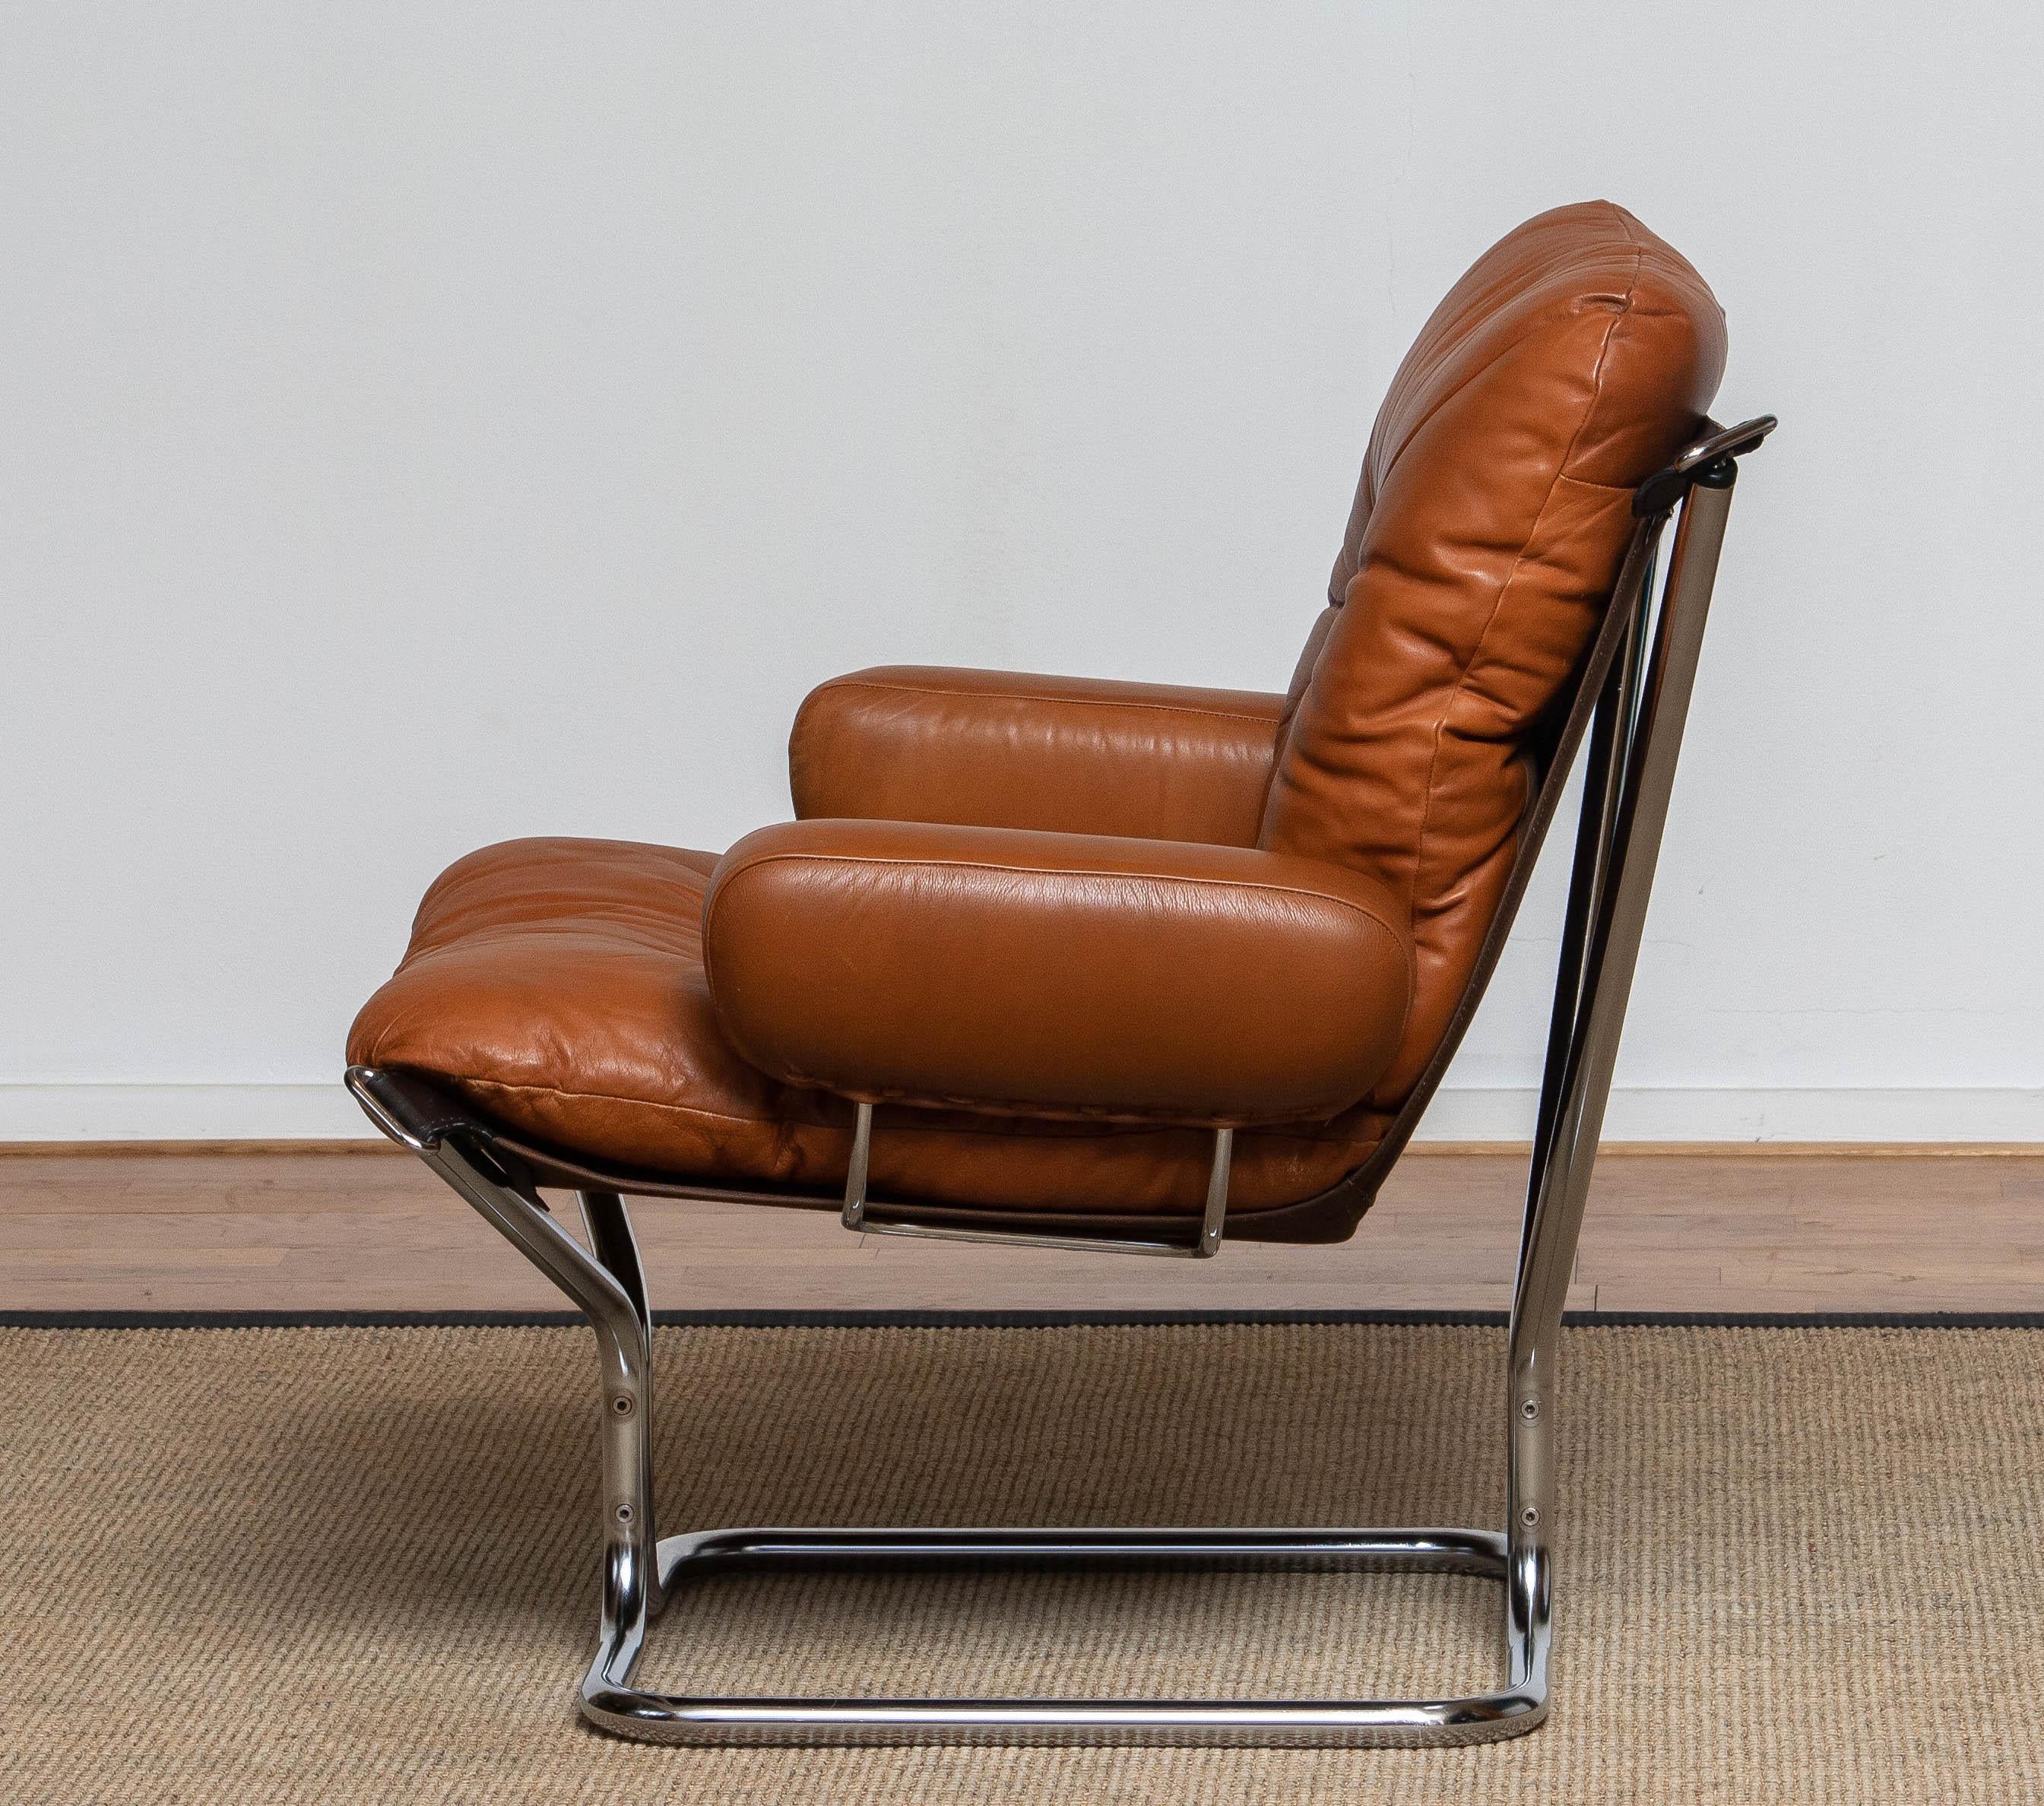 Norwegian 1970's Cognac Leather and Chrome Lounge Chair by Harald Relling for Westnofa